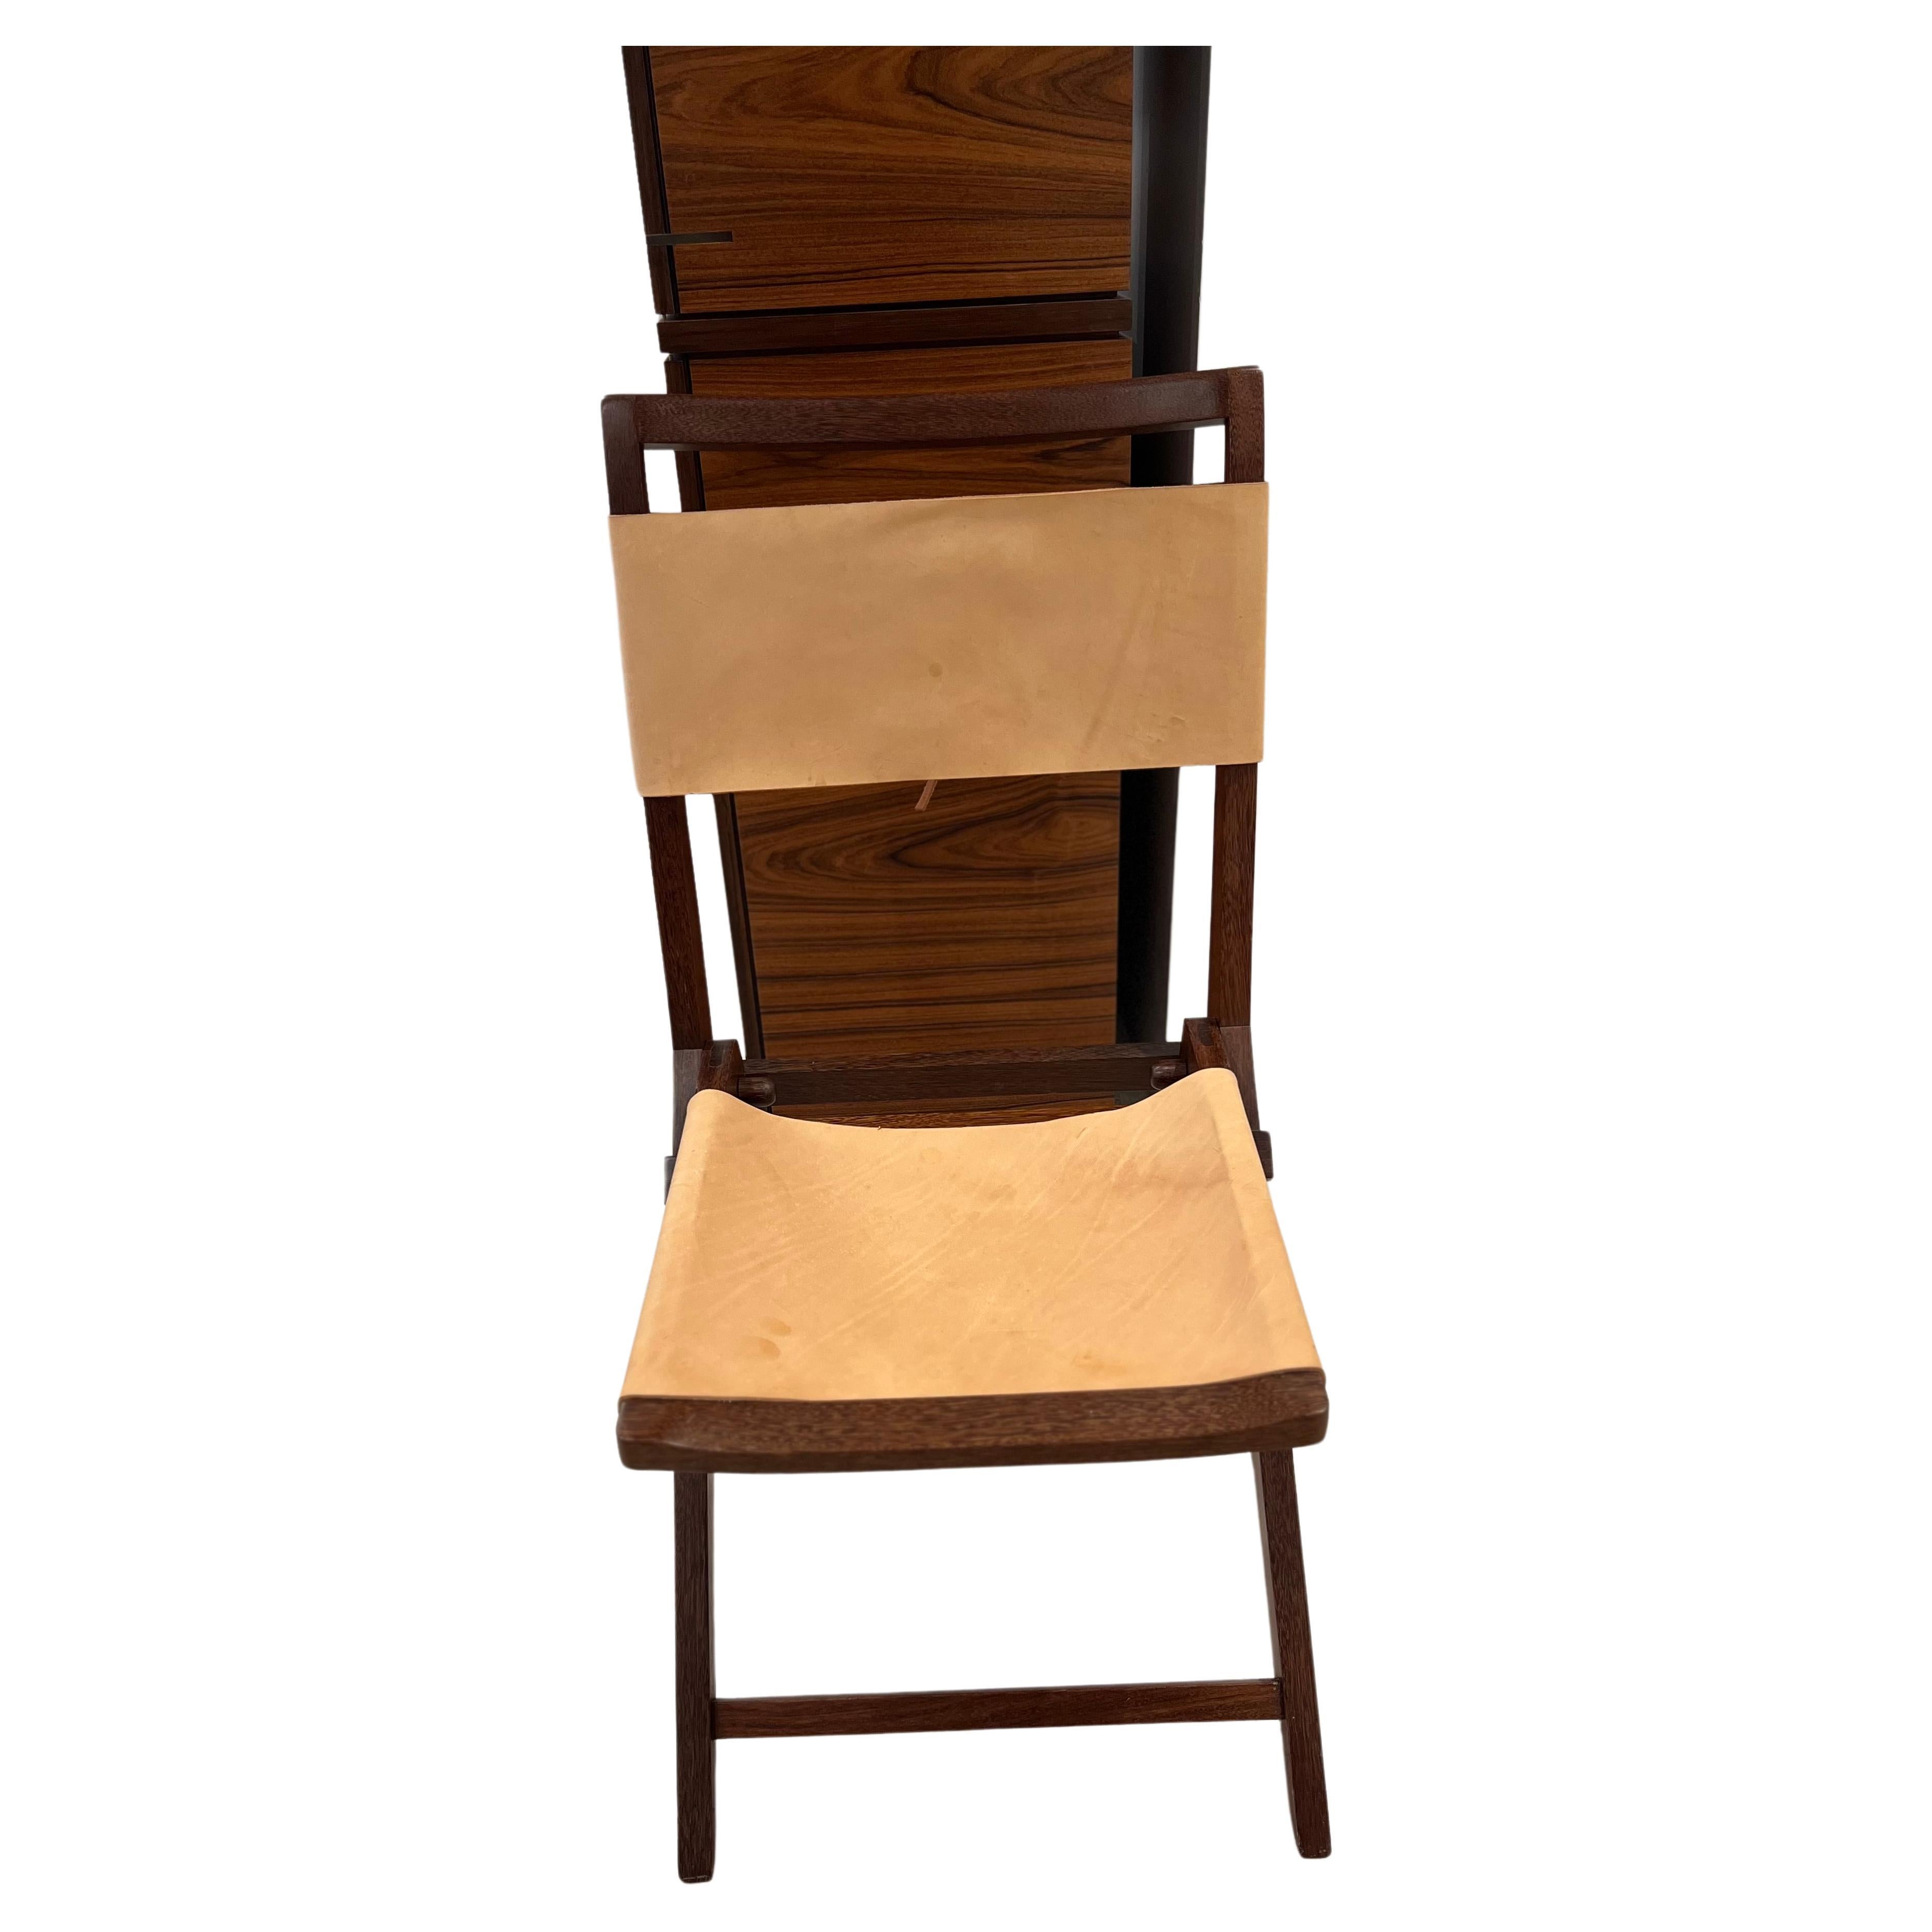 MASP Auditorium Chair by Lina Bo Bardi For Sale